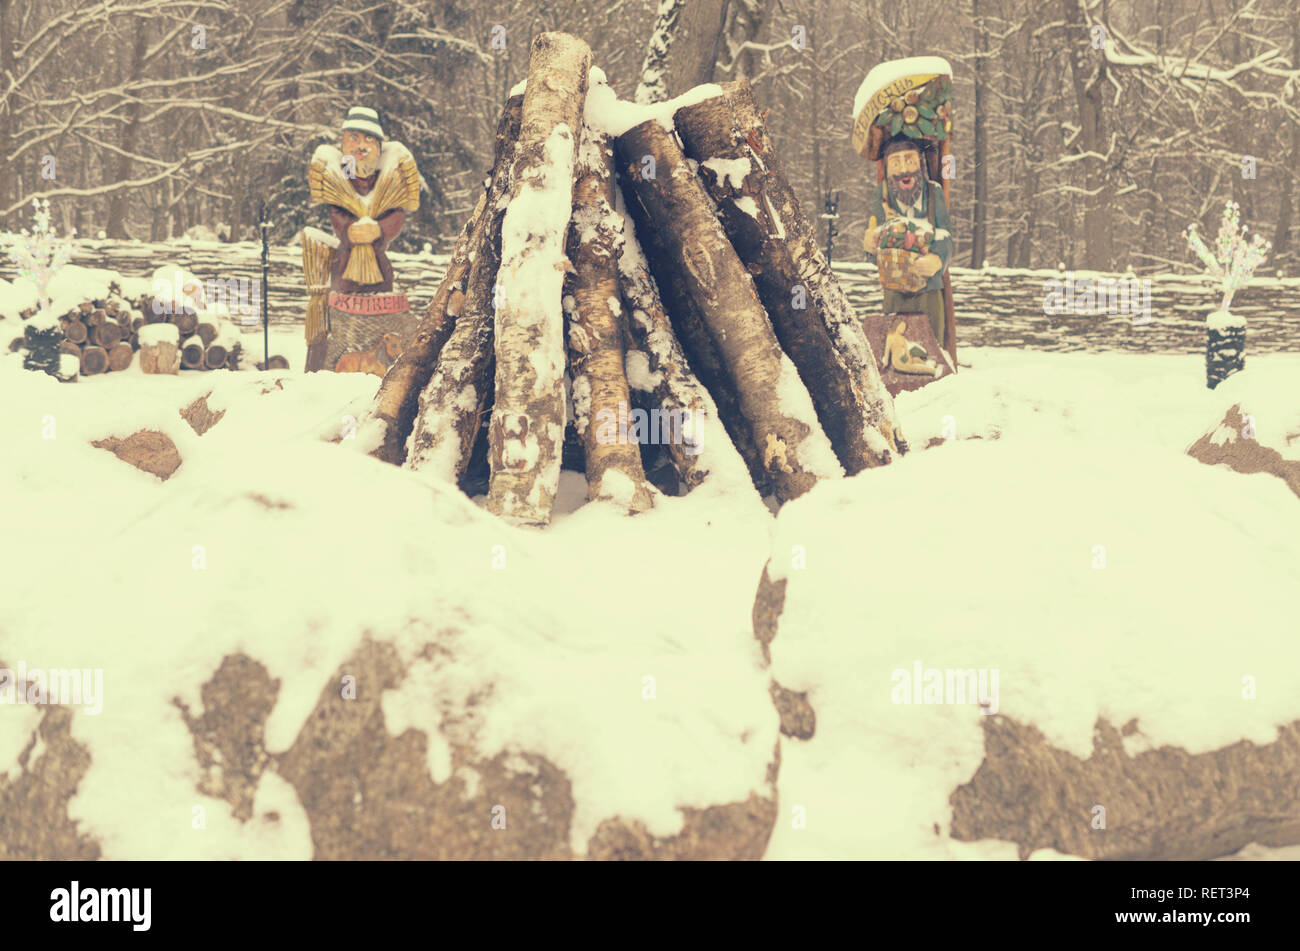 Brest, Belarus - January 11, 2019: The logs for the fire are lined with stones as temples against the statues of ancient deities Stock Photo